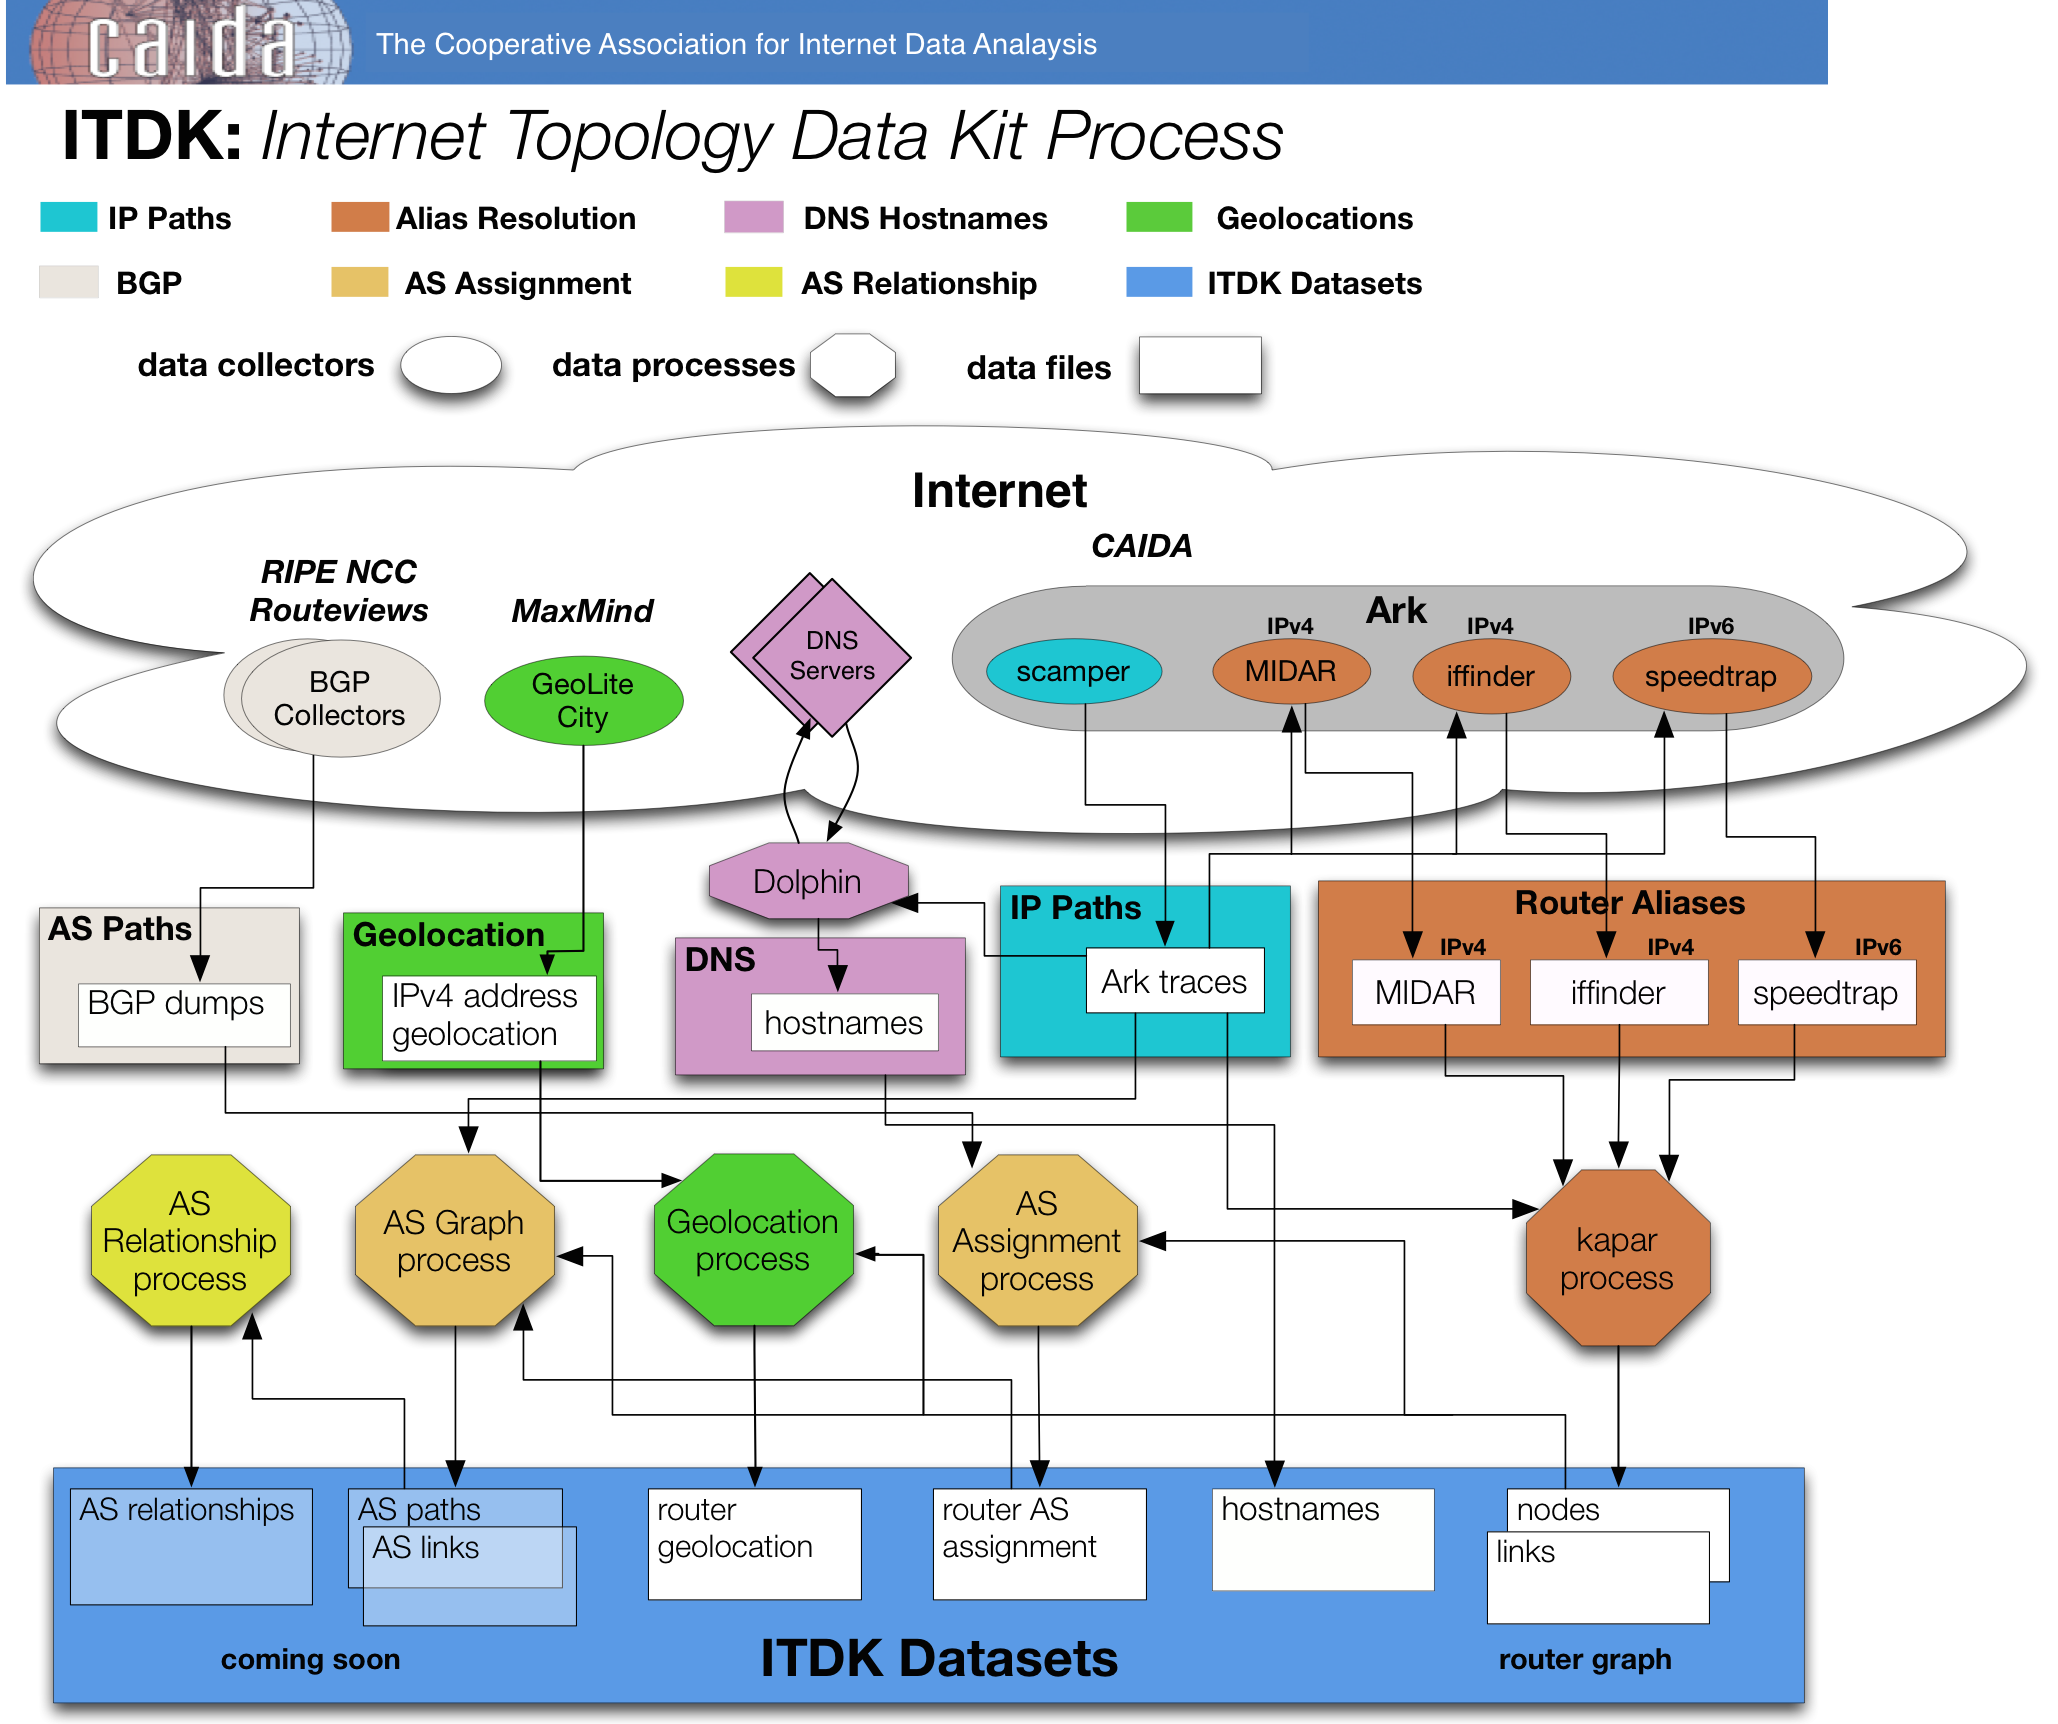 images/topology-data-process-itdk.png